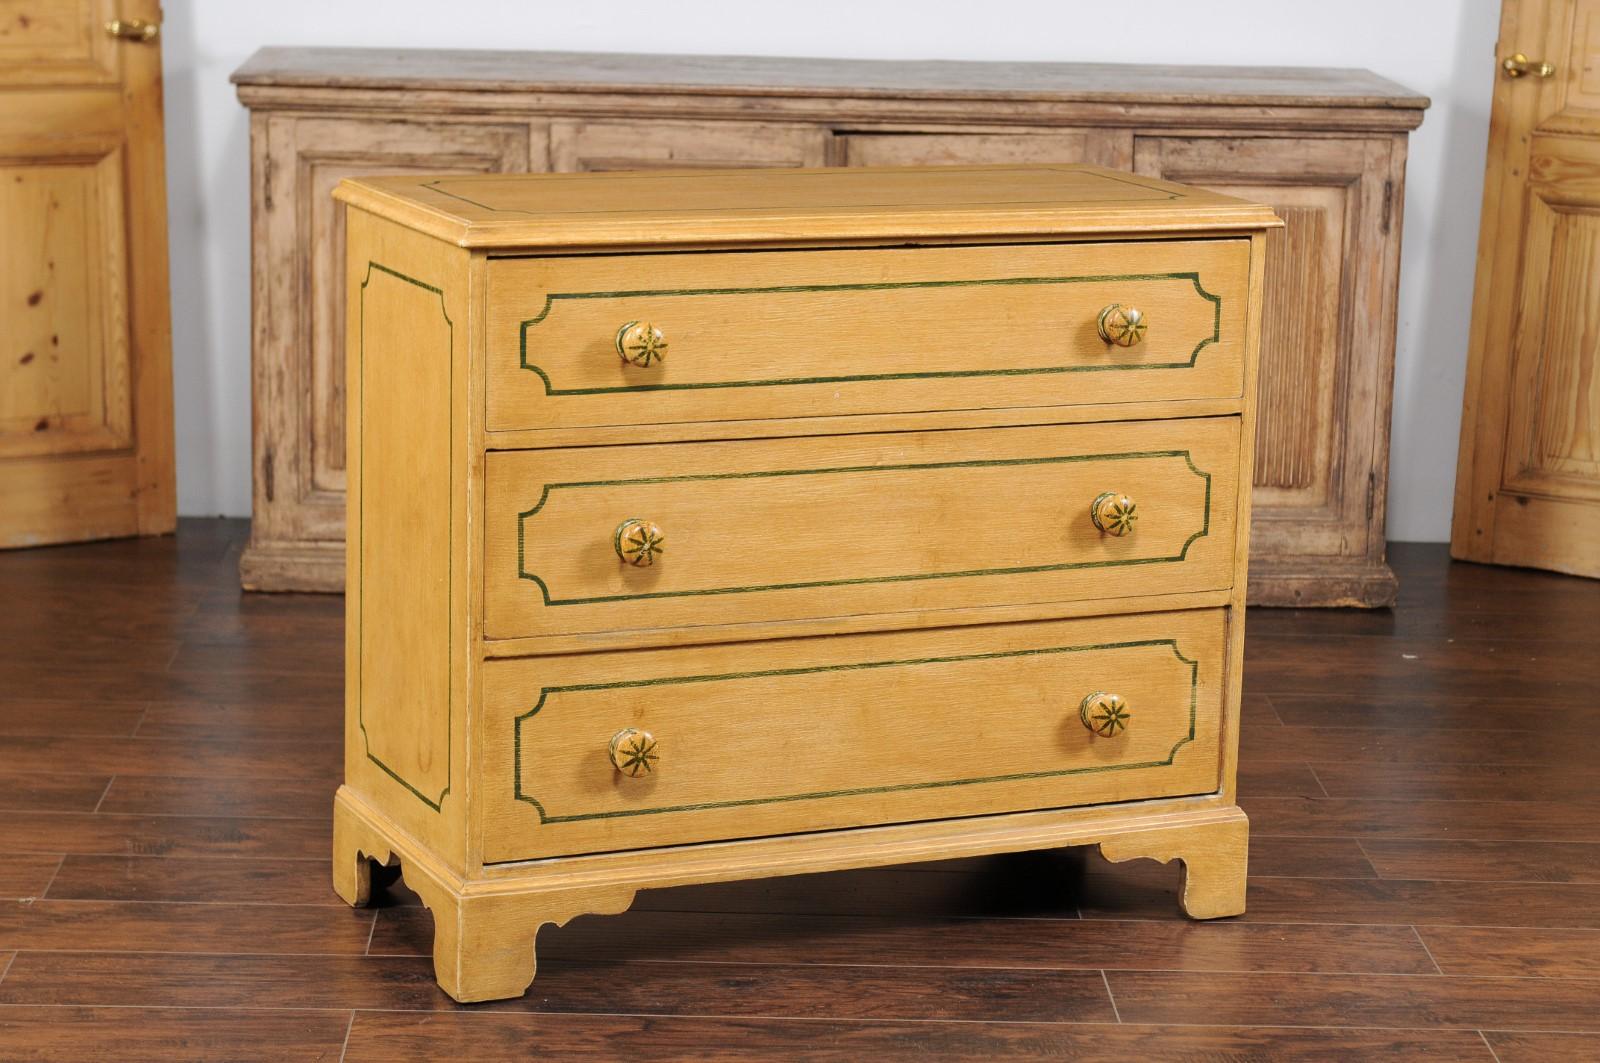 An English vintage painted three-drawer commode from the mid-20th century, with muted yellow finish and painted cartouches. Born in England during the midcentury period, this charming painted commode features a rectangular top sitting above three